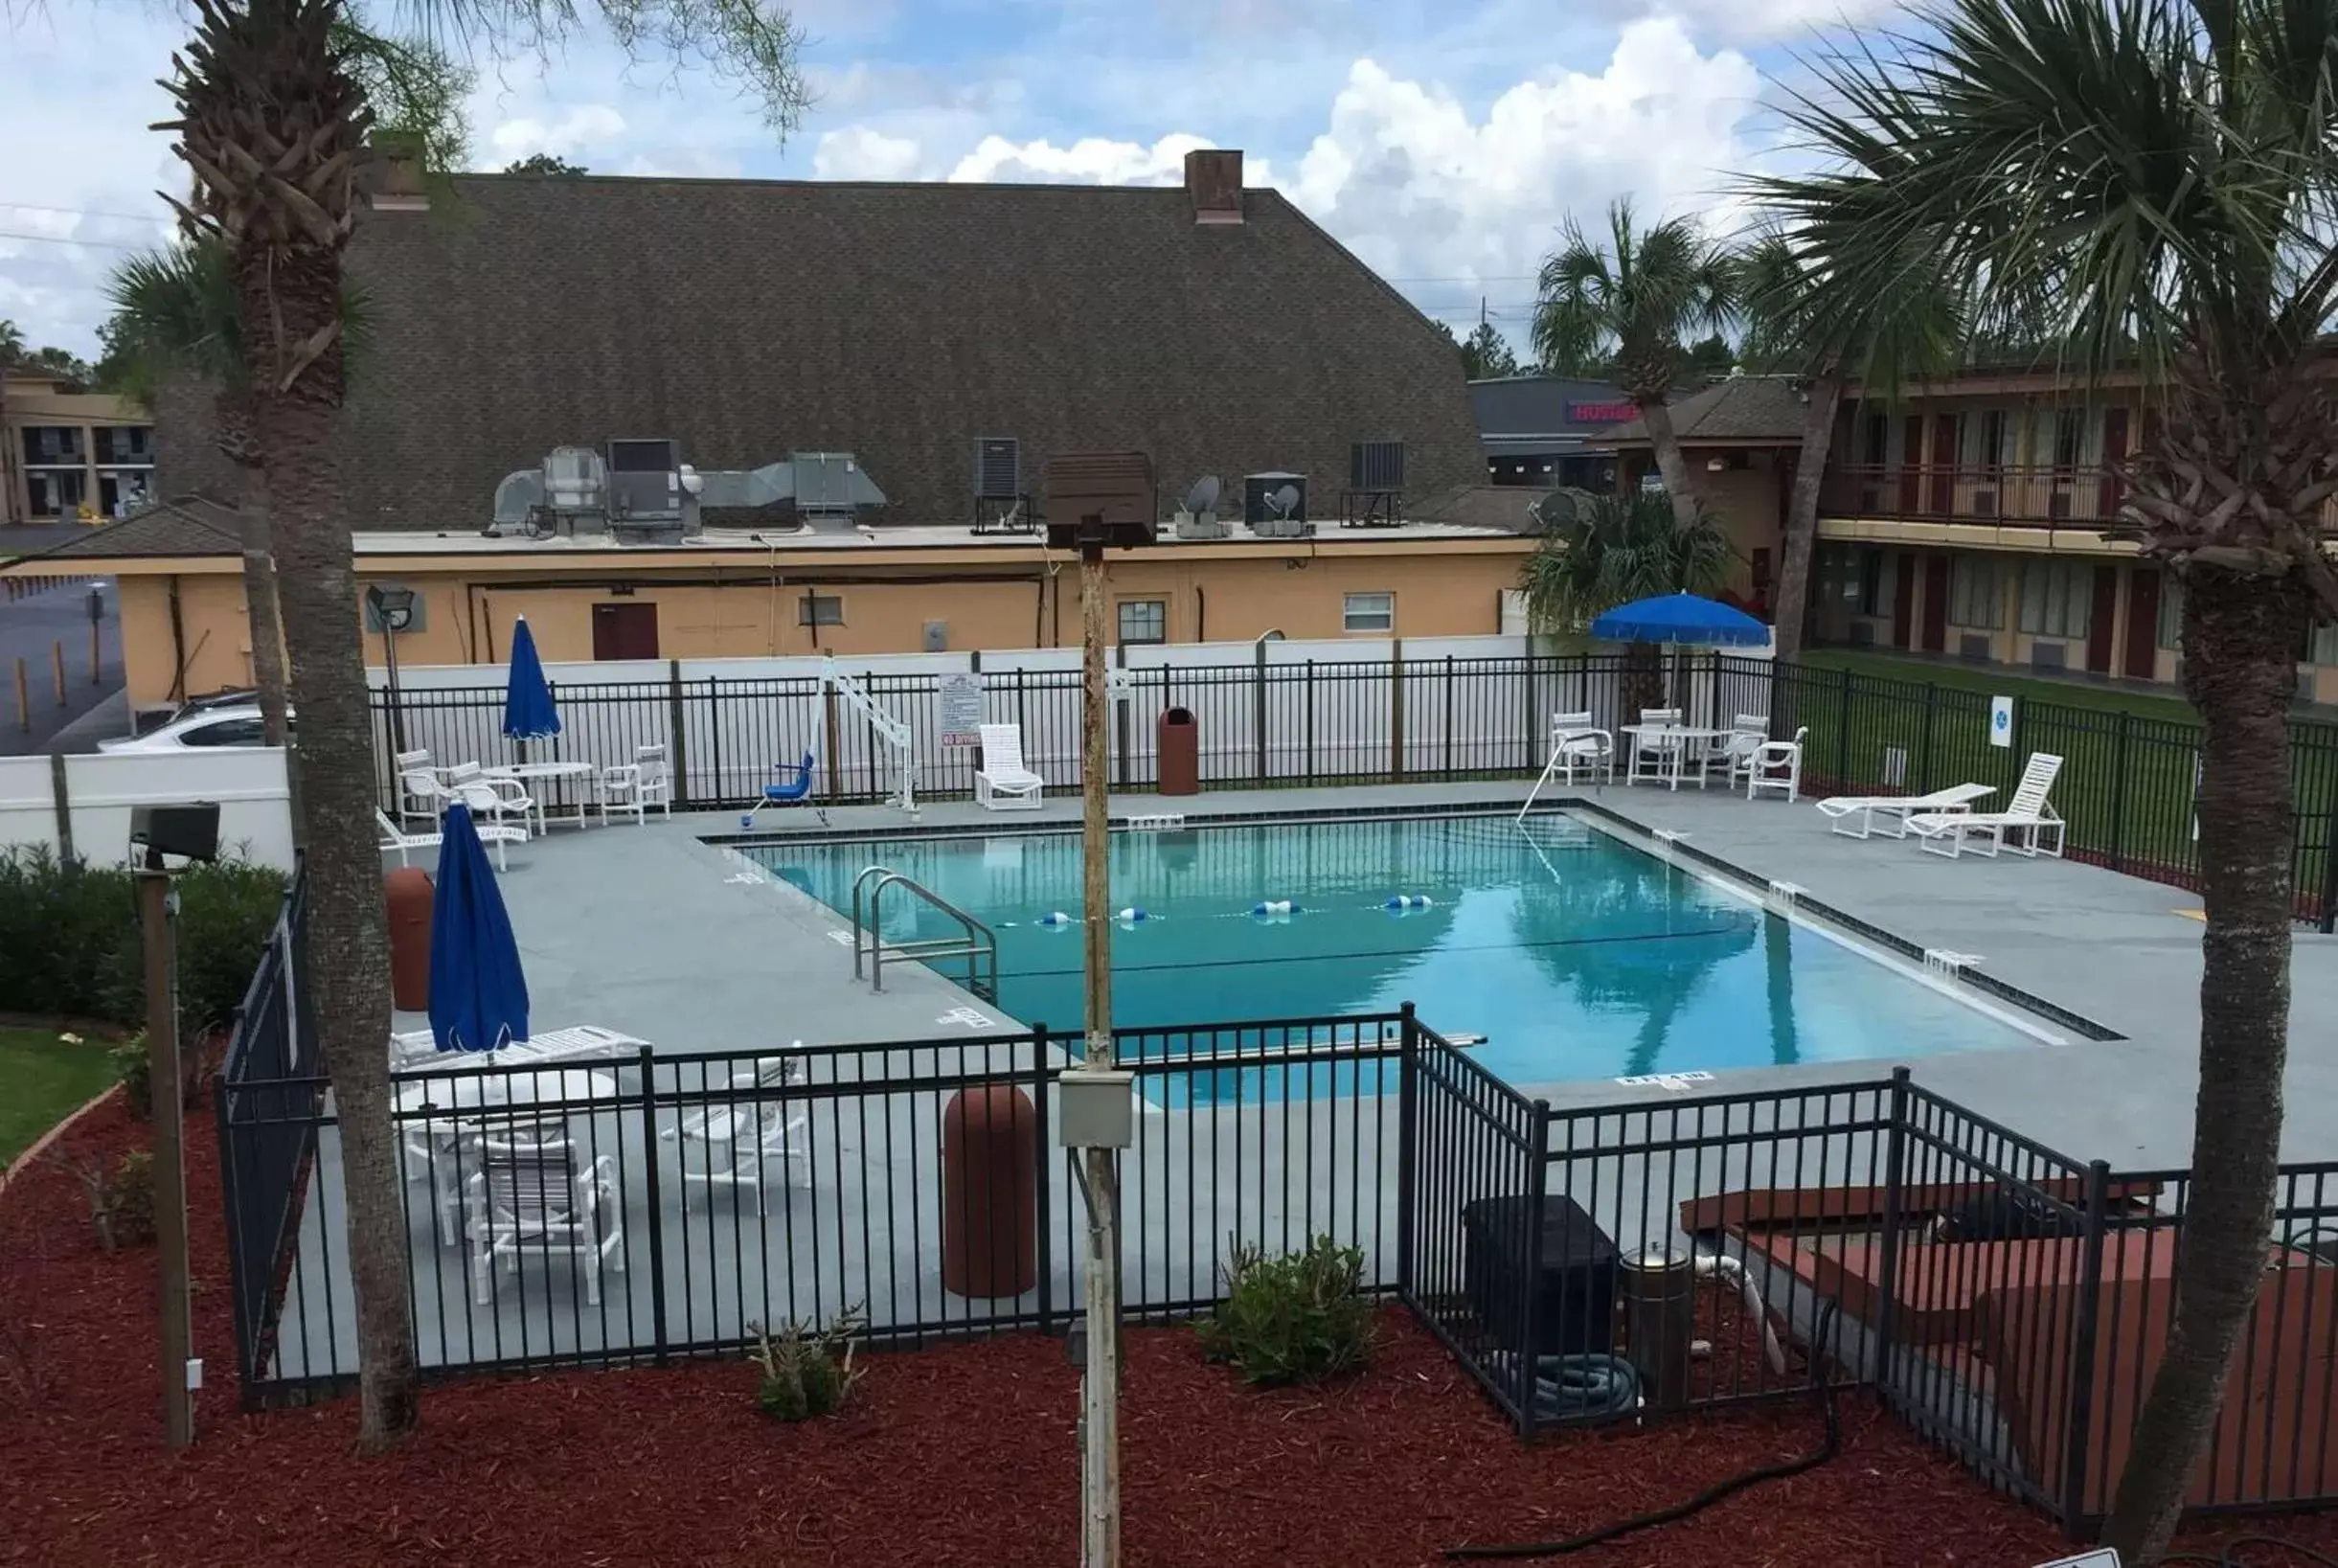 On site, Pool View in Days Inn by Wyndham St Augustine I-95-Outlet Mall